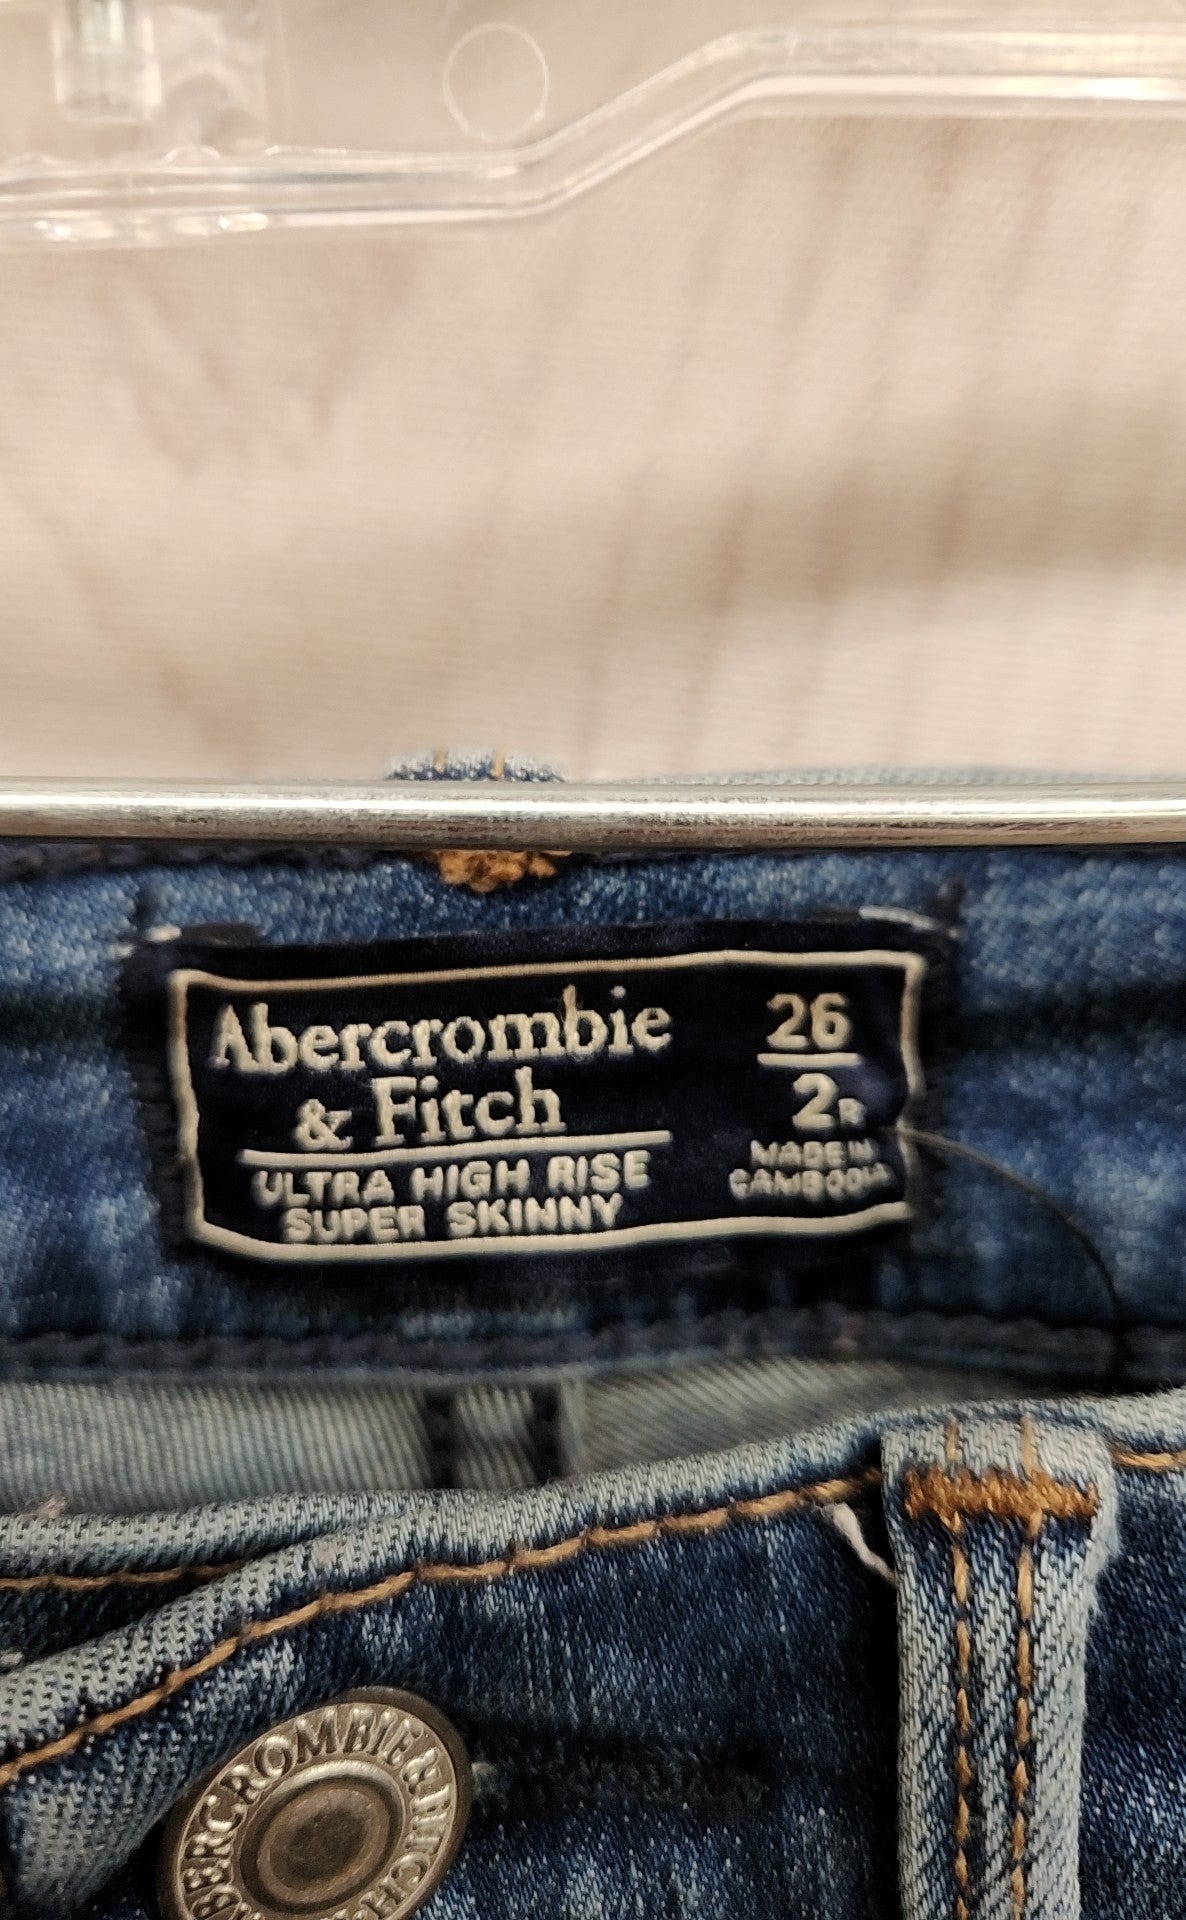 Abercrombie & Fitch Women's Size 26 (1-2) Ultra HighRise Super Skinny Blue Jeans